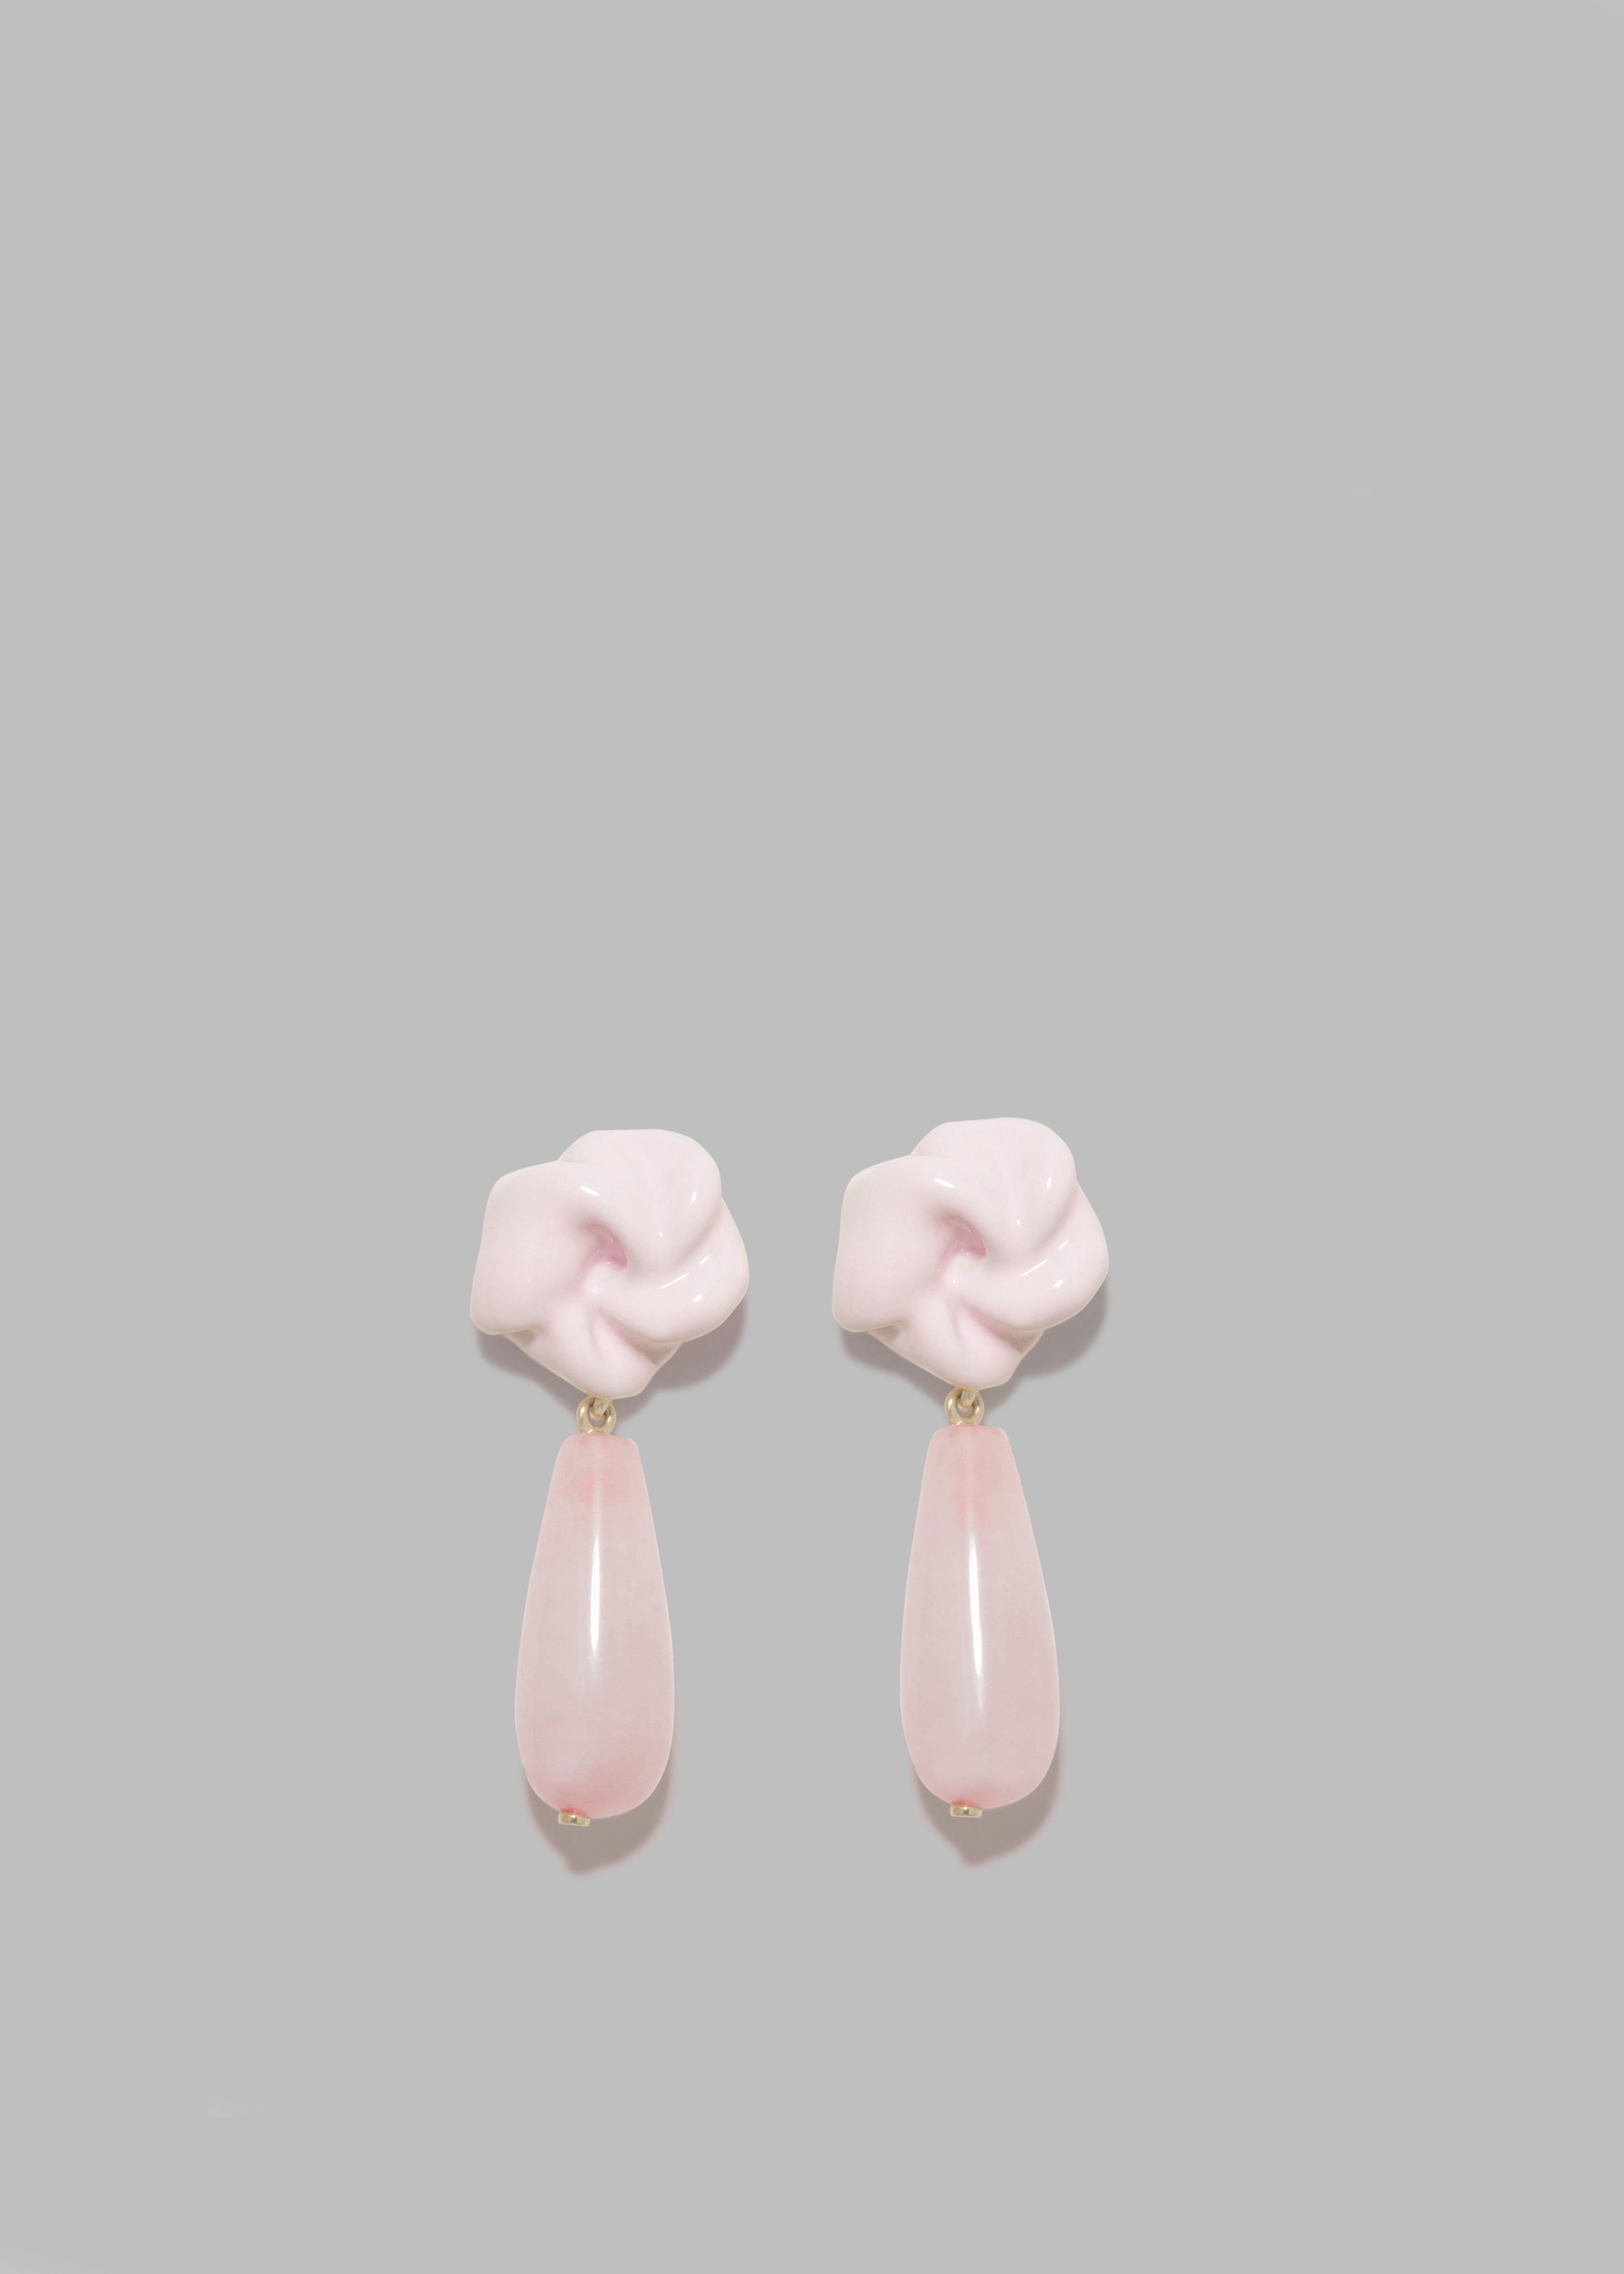 Completedworks The Depths of Time Earrings - Pink - 1